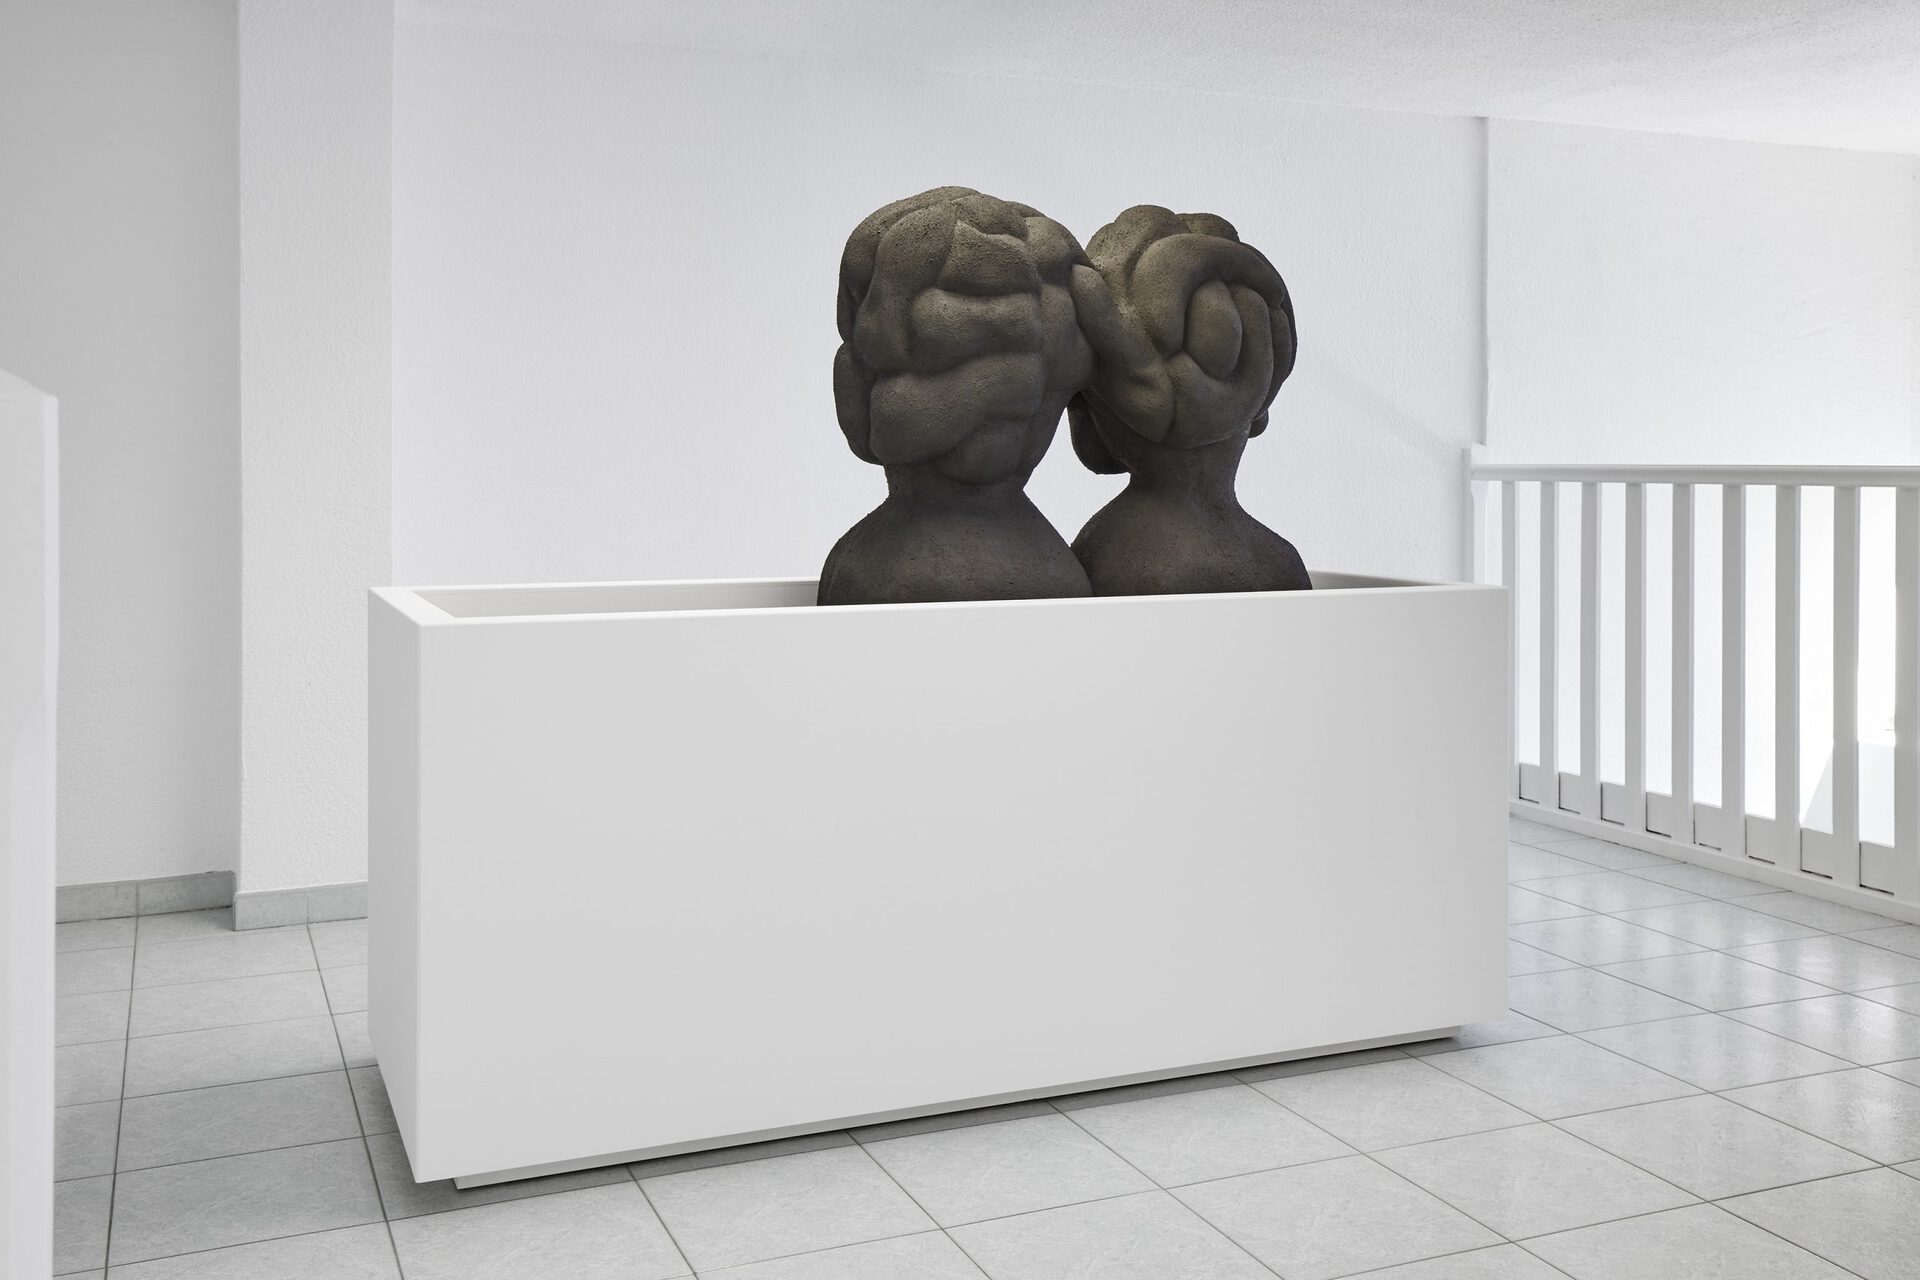 Hamish Pearch, Soup, 2020, MDF, polymerised gypsum, paint, commingled French and British sand,150x182x72 cm